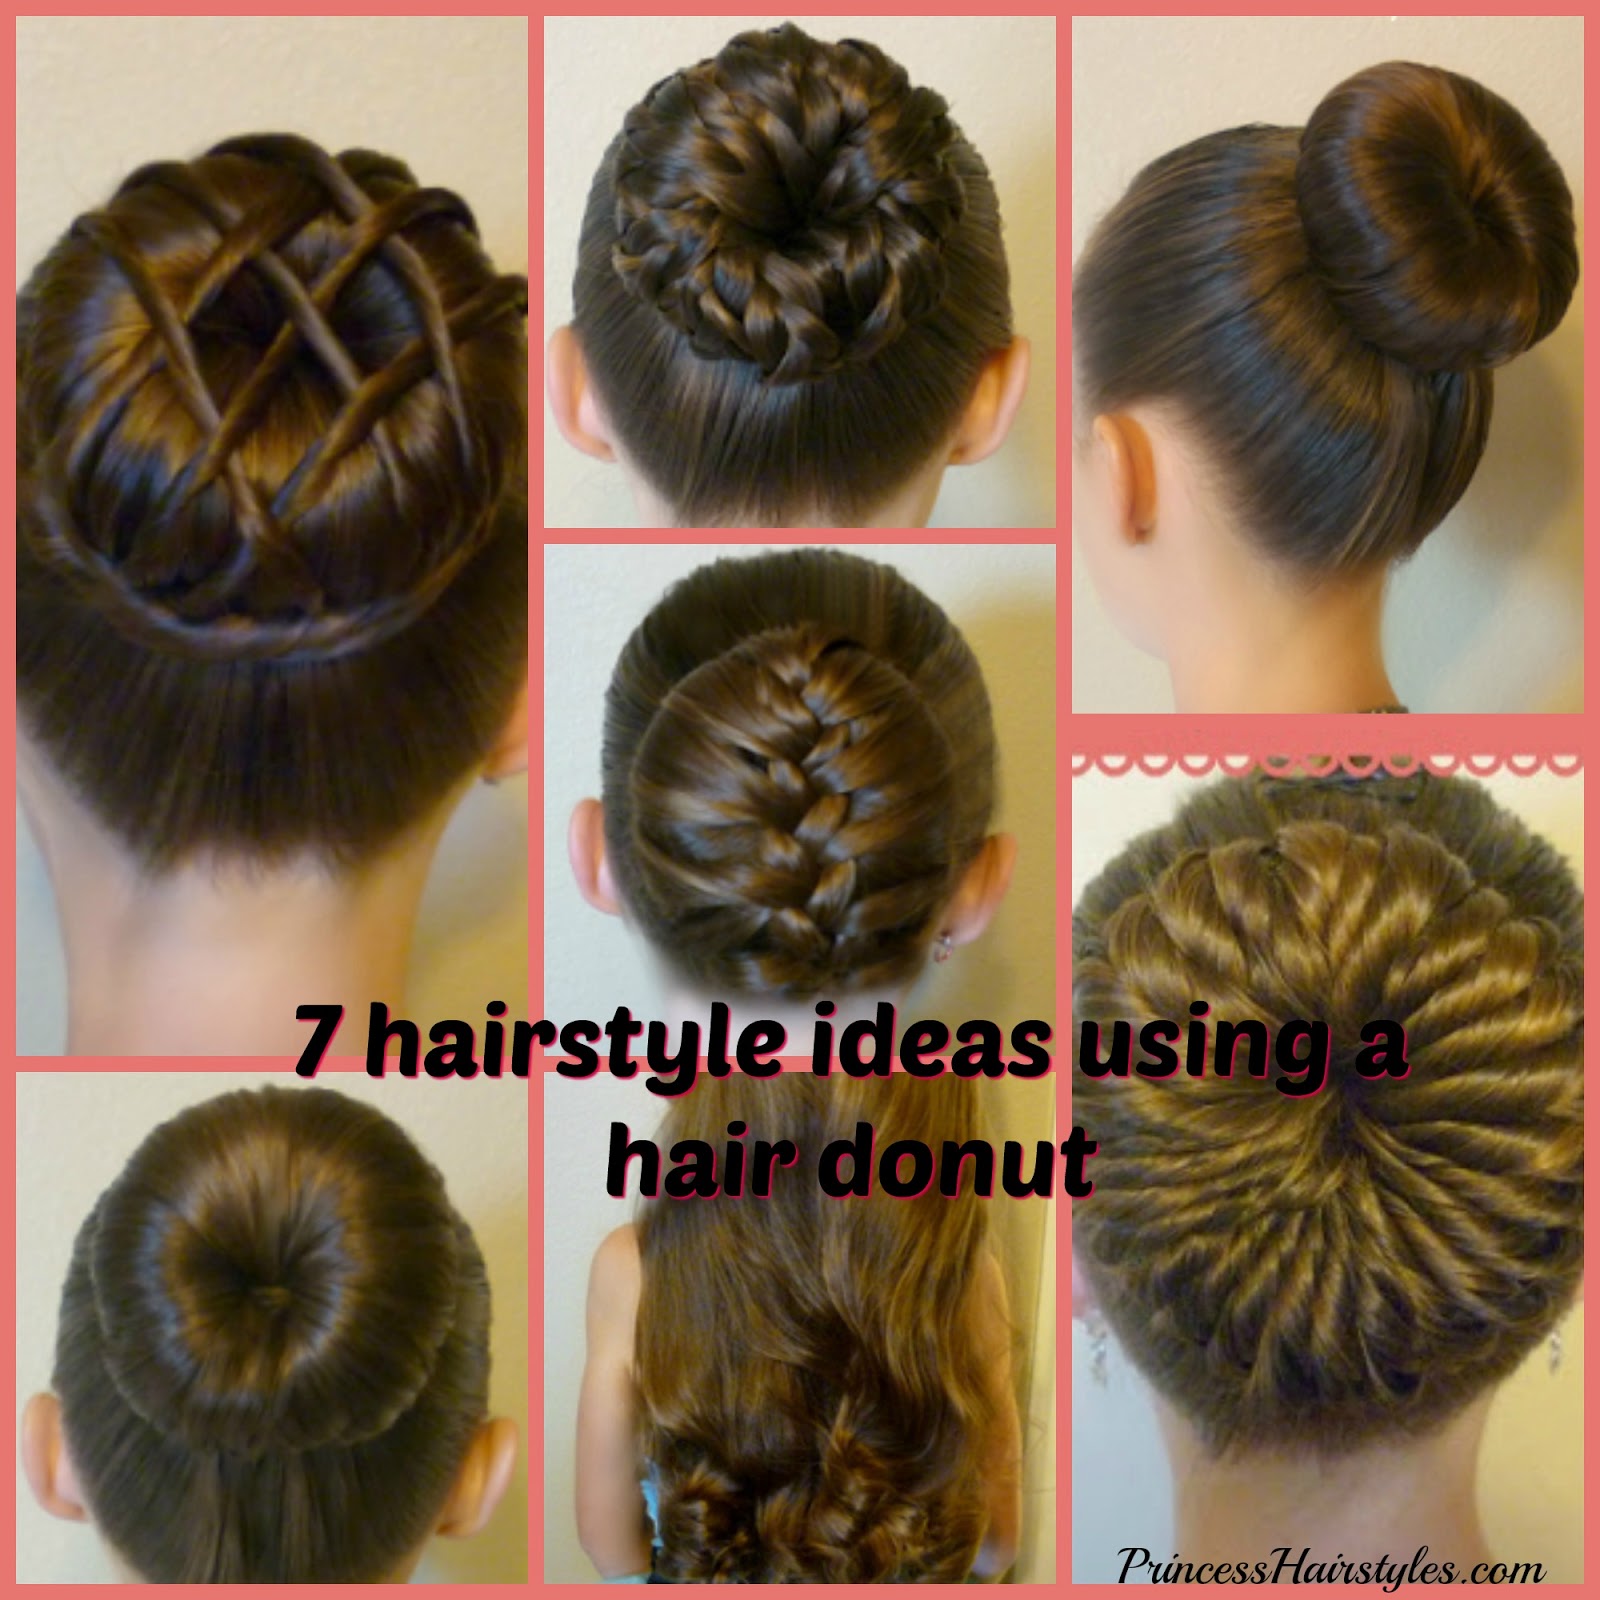 7 Ways To Make A Bun Using A Hair Donut Hairstyles For Girls Princess Hairstyles